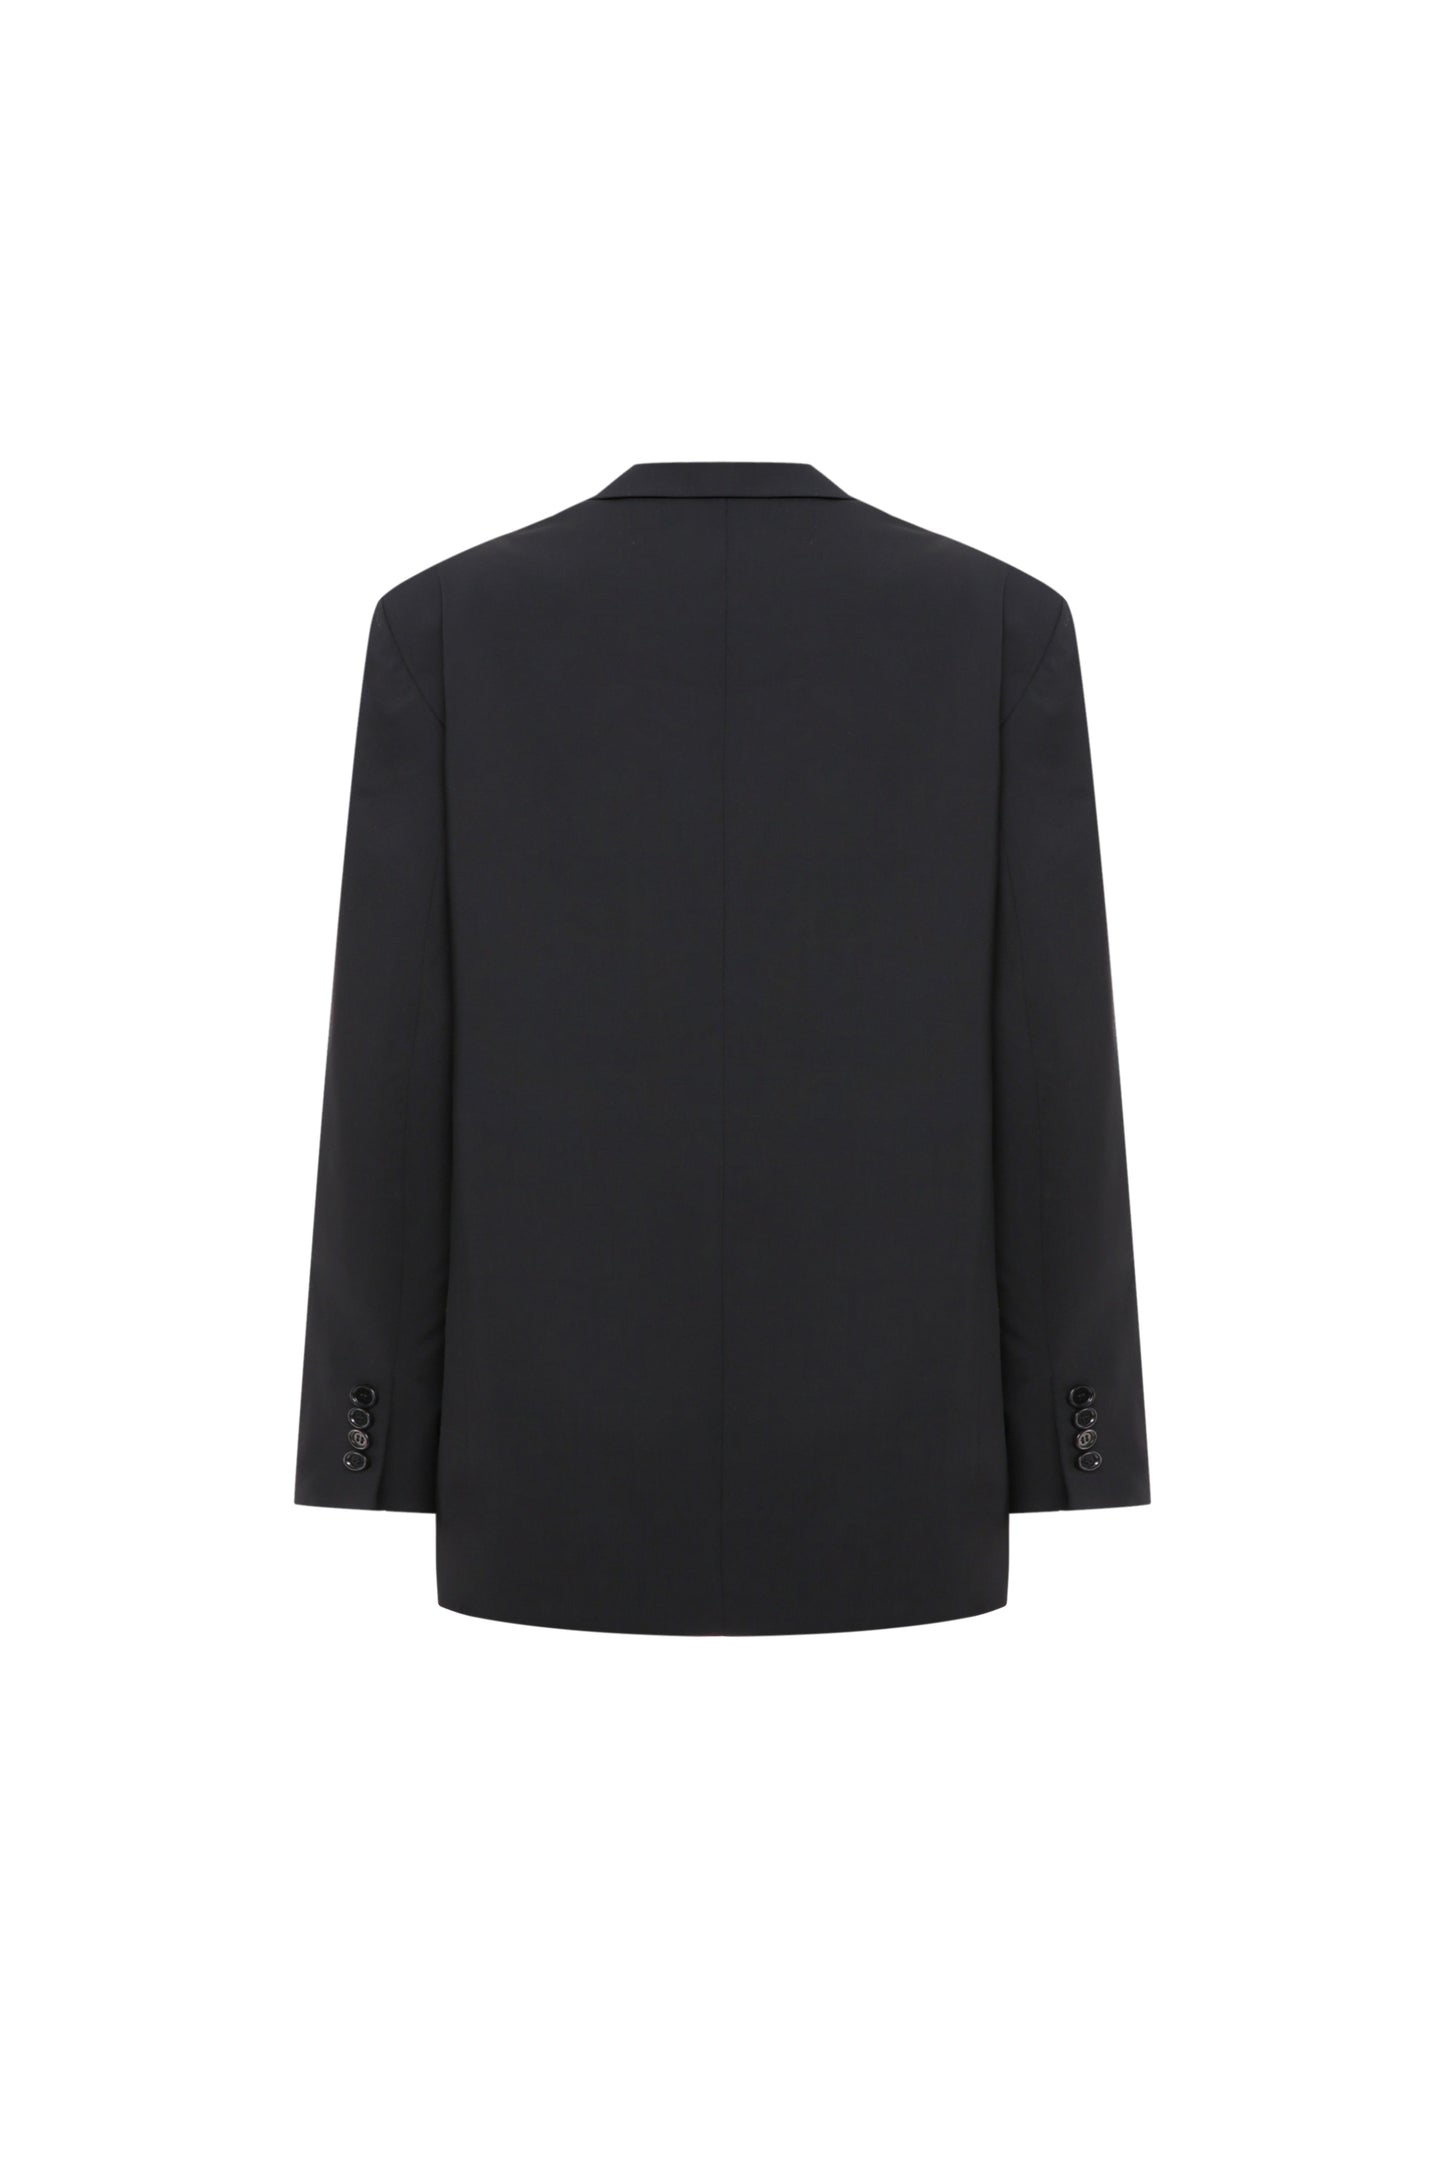 Black jacket with white detail A.M.G.